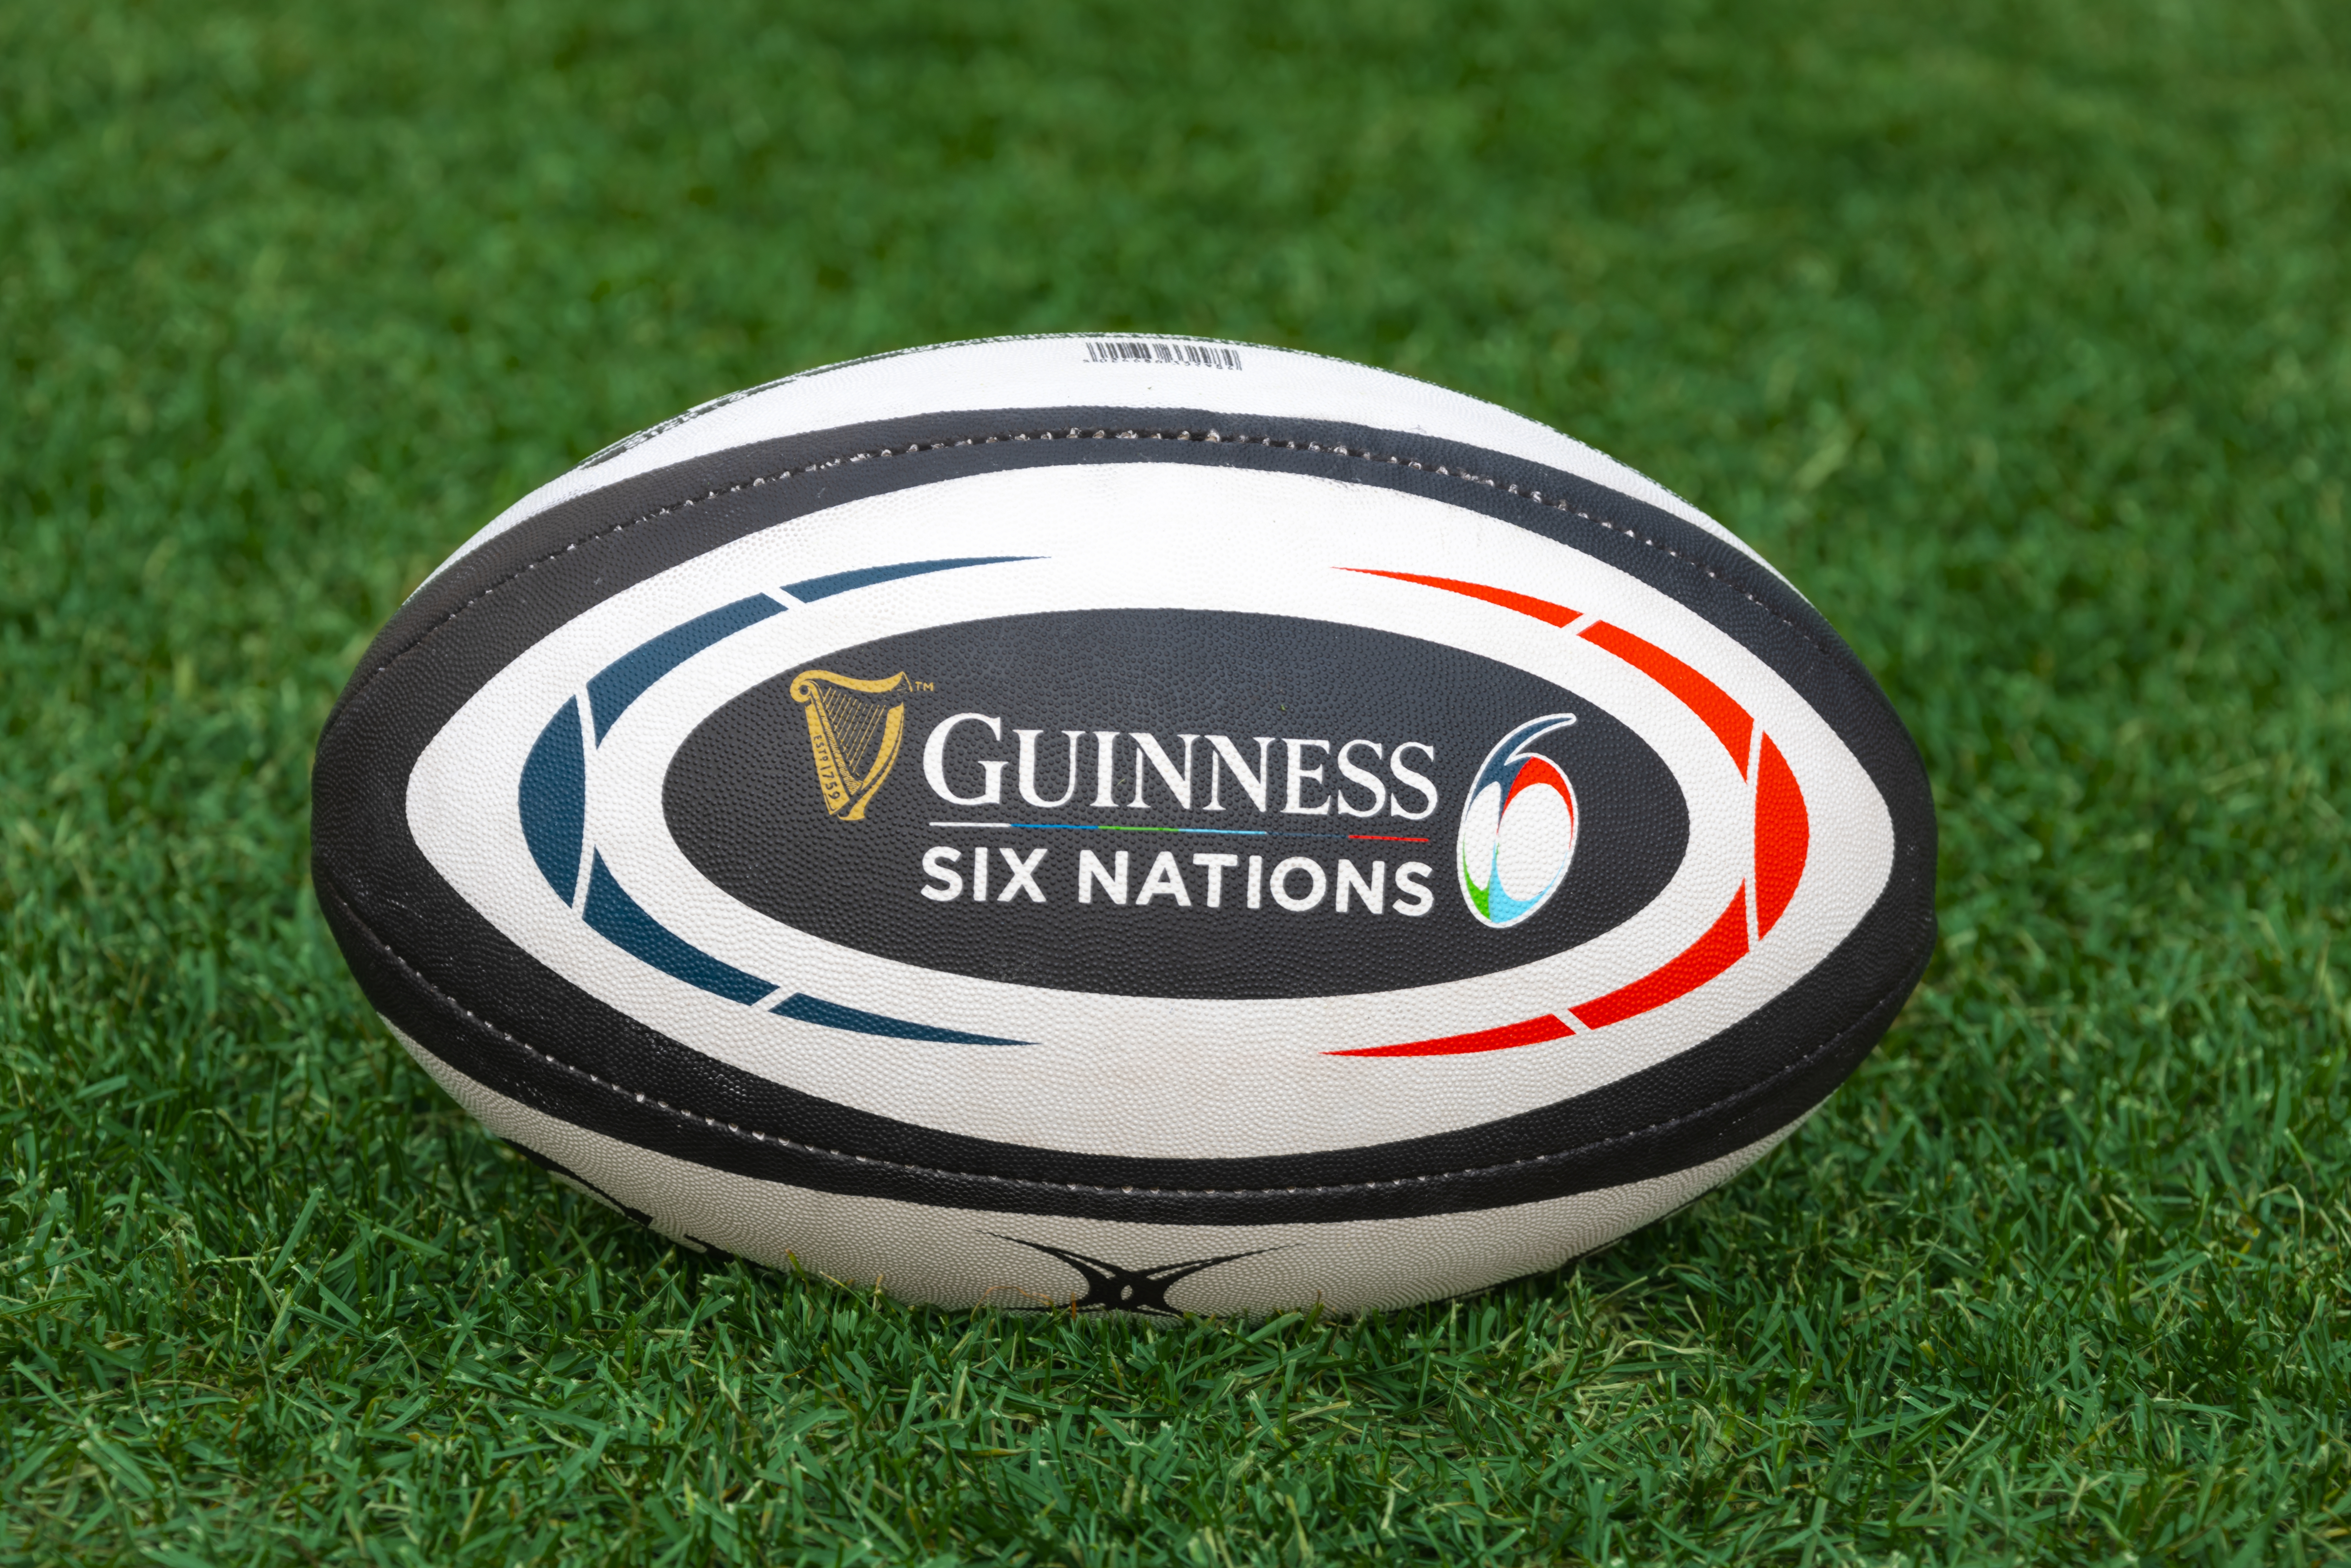 England face France in their final Six Nations match on Saturday